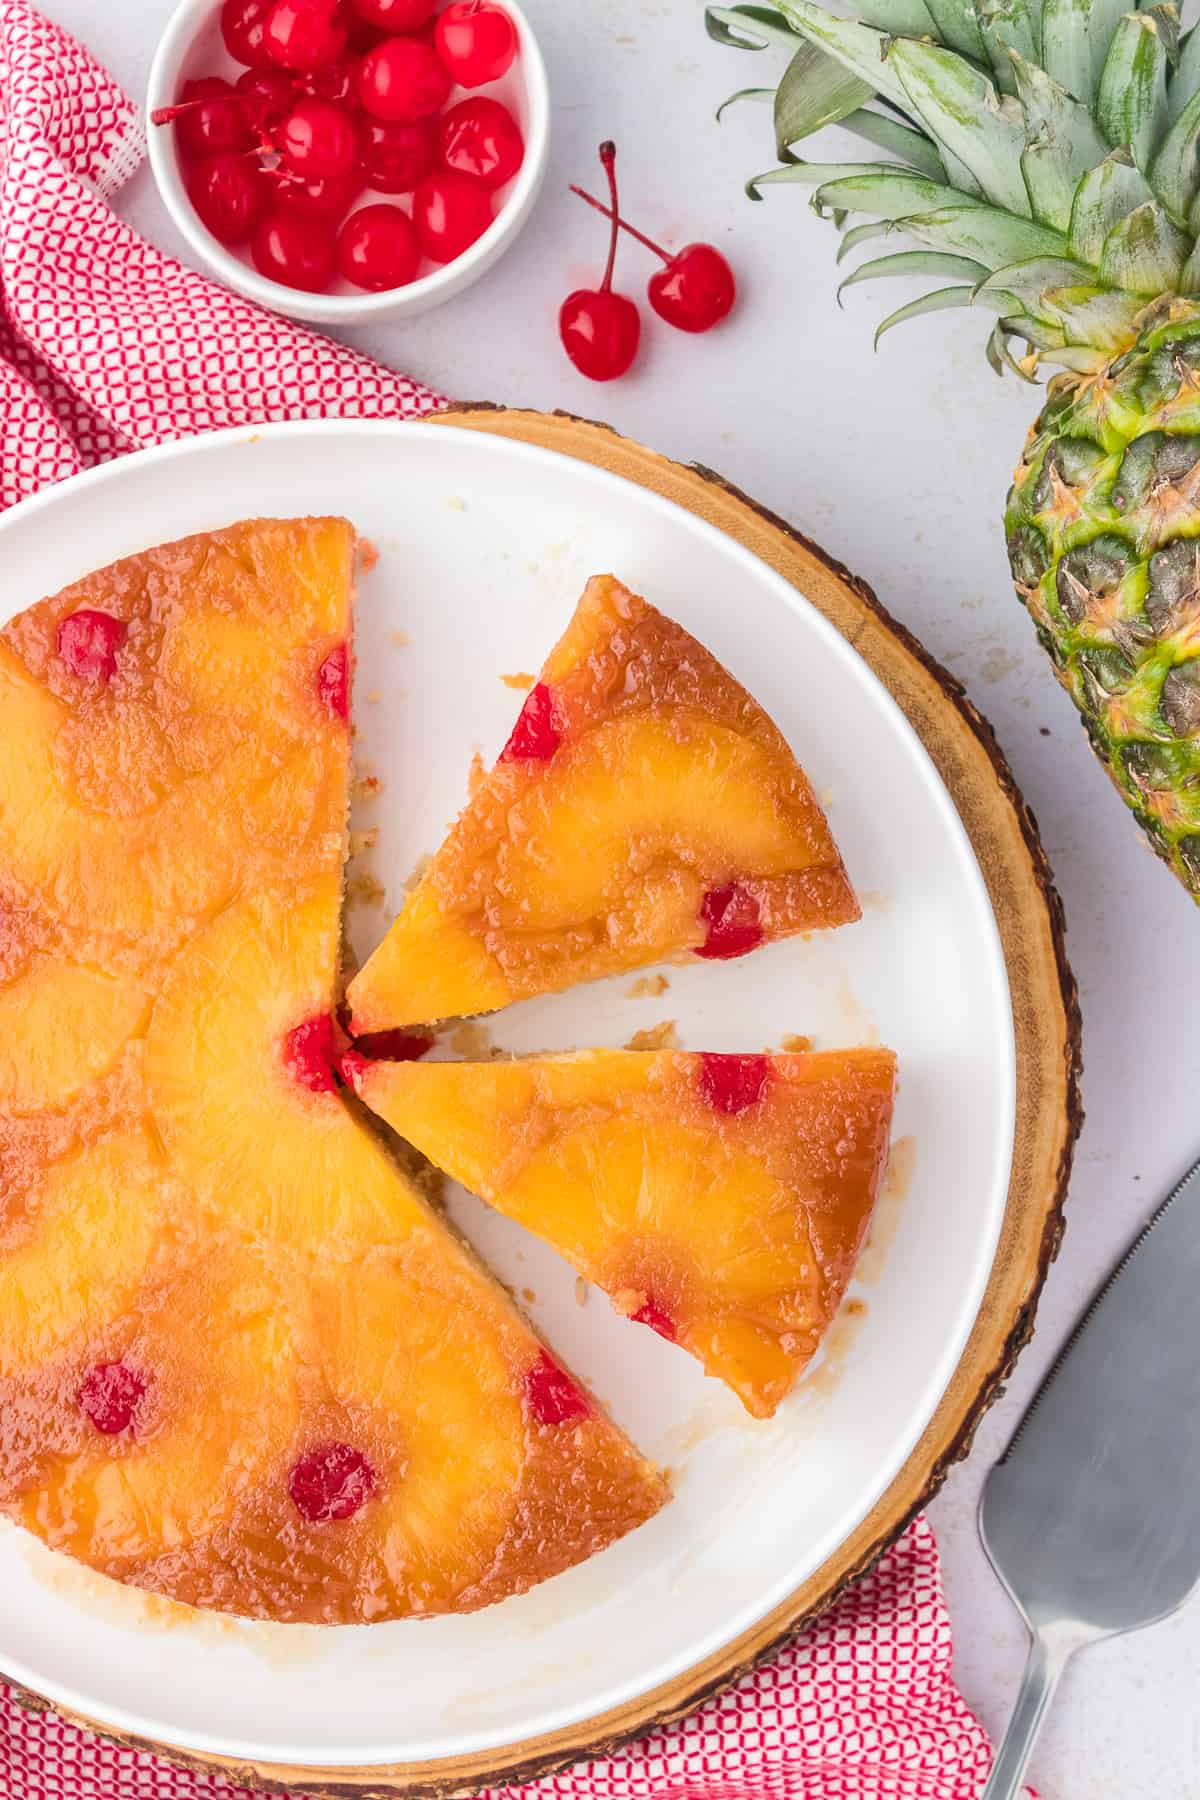 sliced pineapple upside down cake on a white plate with a red and white kitchen towel, serving spatula, pineapple and small bowl of maraschino cherries arranged around it